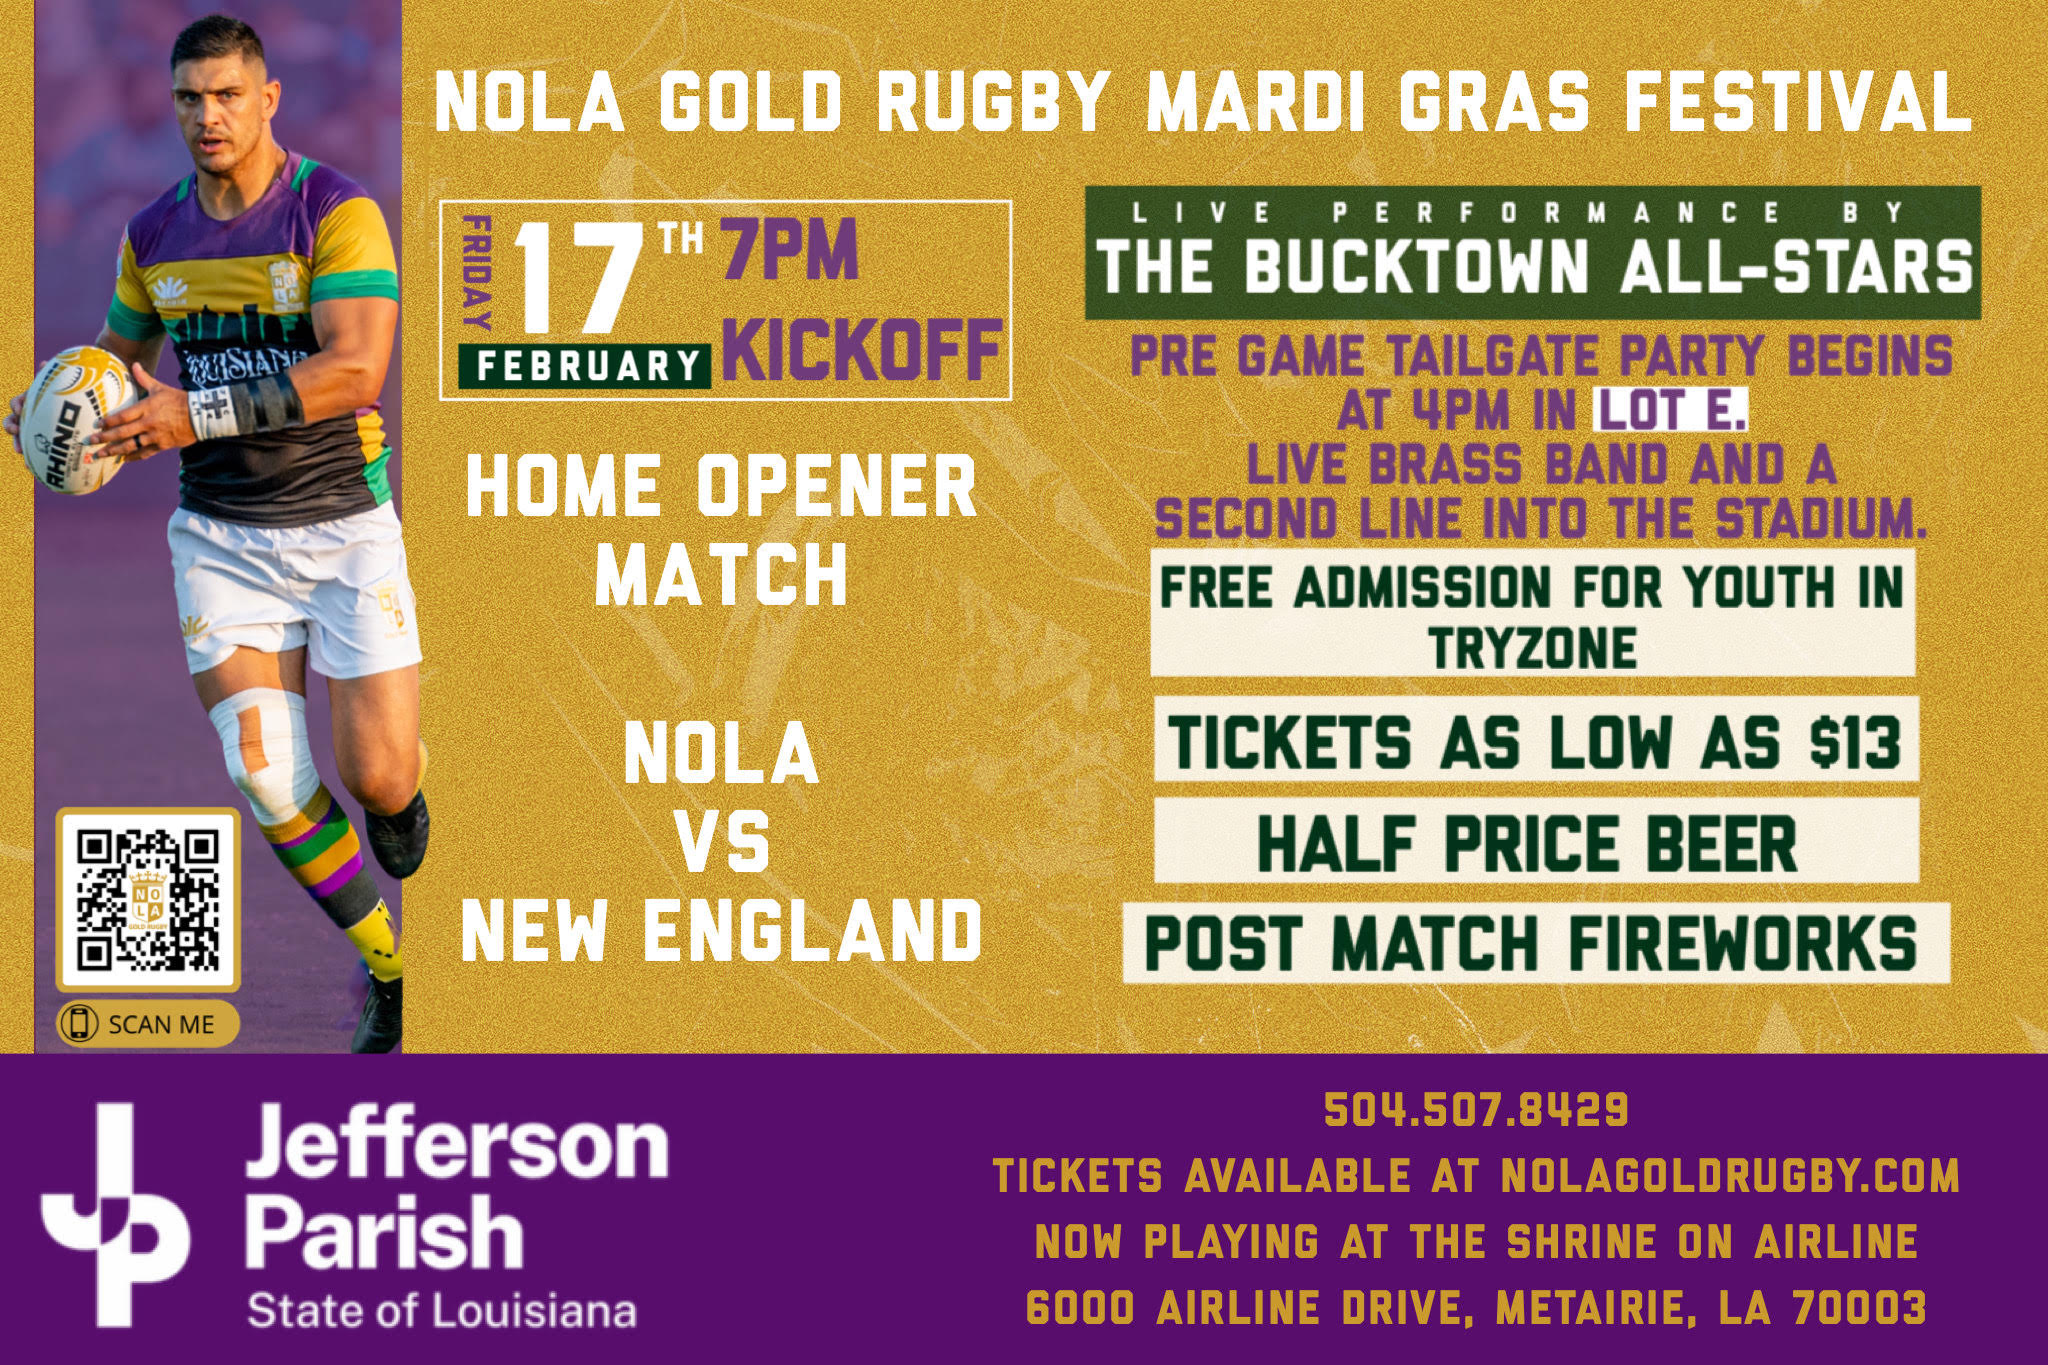 NOLA GOLD RUGBY, IN PARTNERSHIP WITH JEFFERSON PARISH,  WILL HOST MARDI GRAS FESTIVAL TO KICK-OFF 2023 RUBGY SEASON